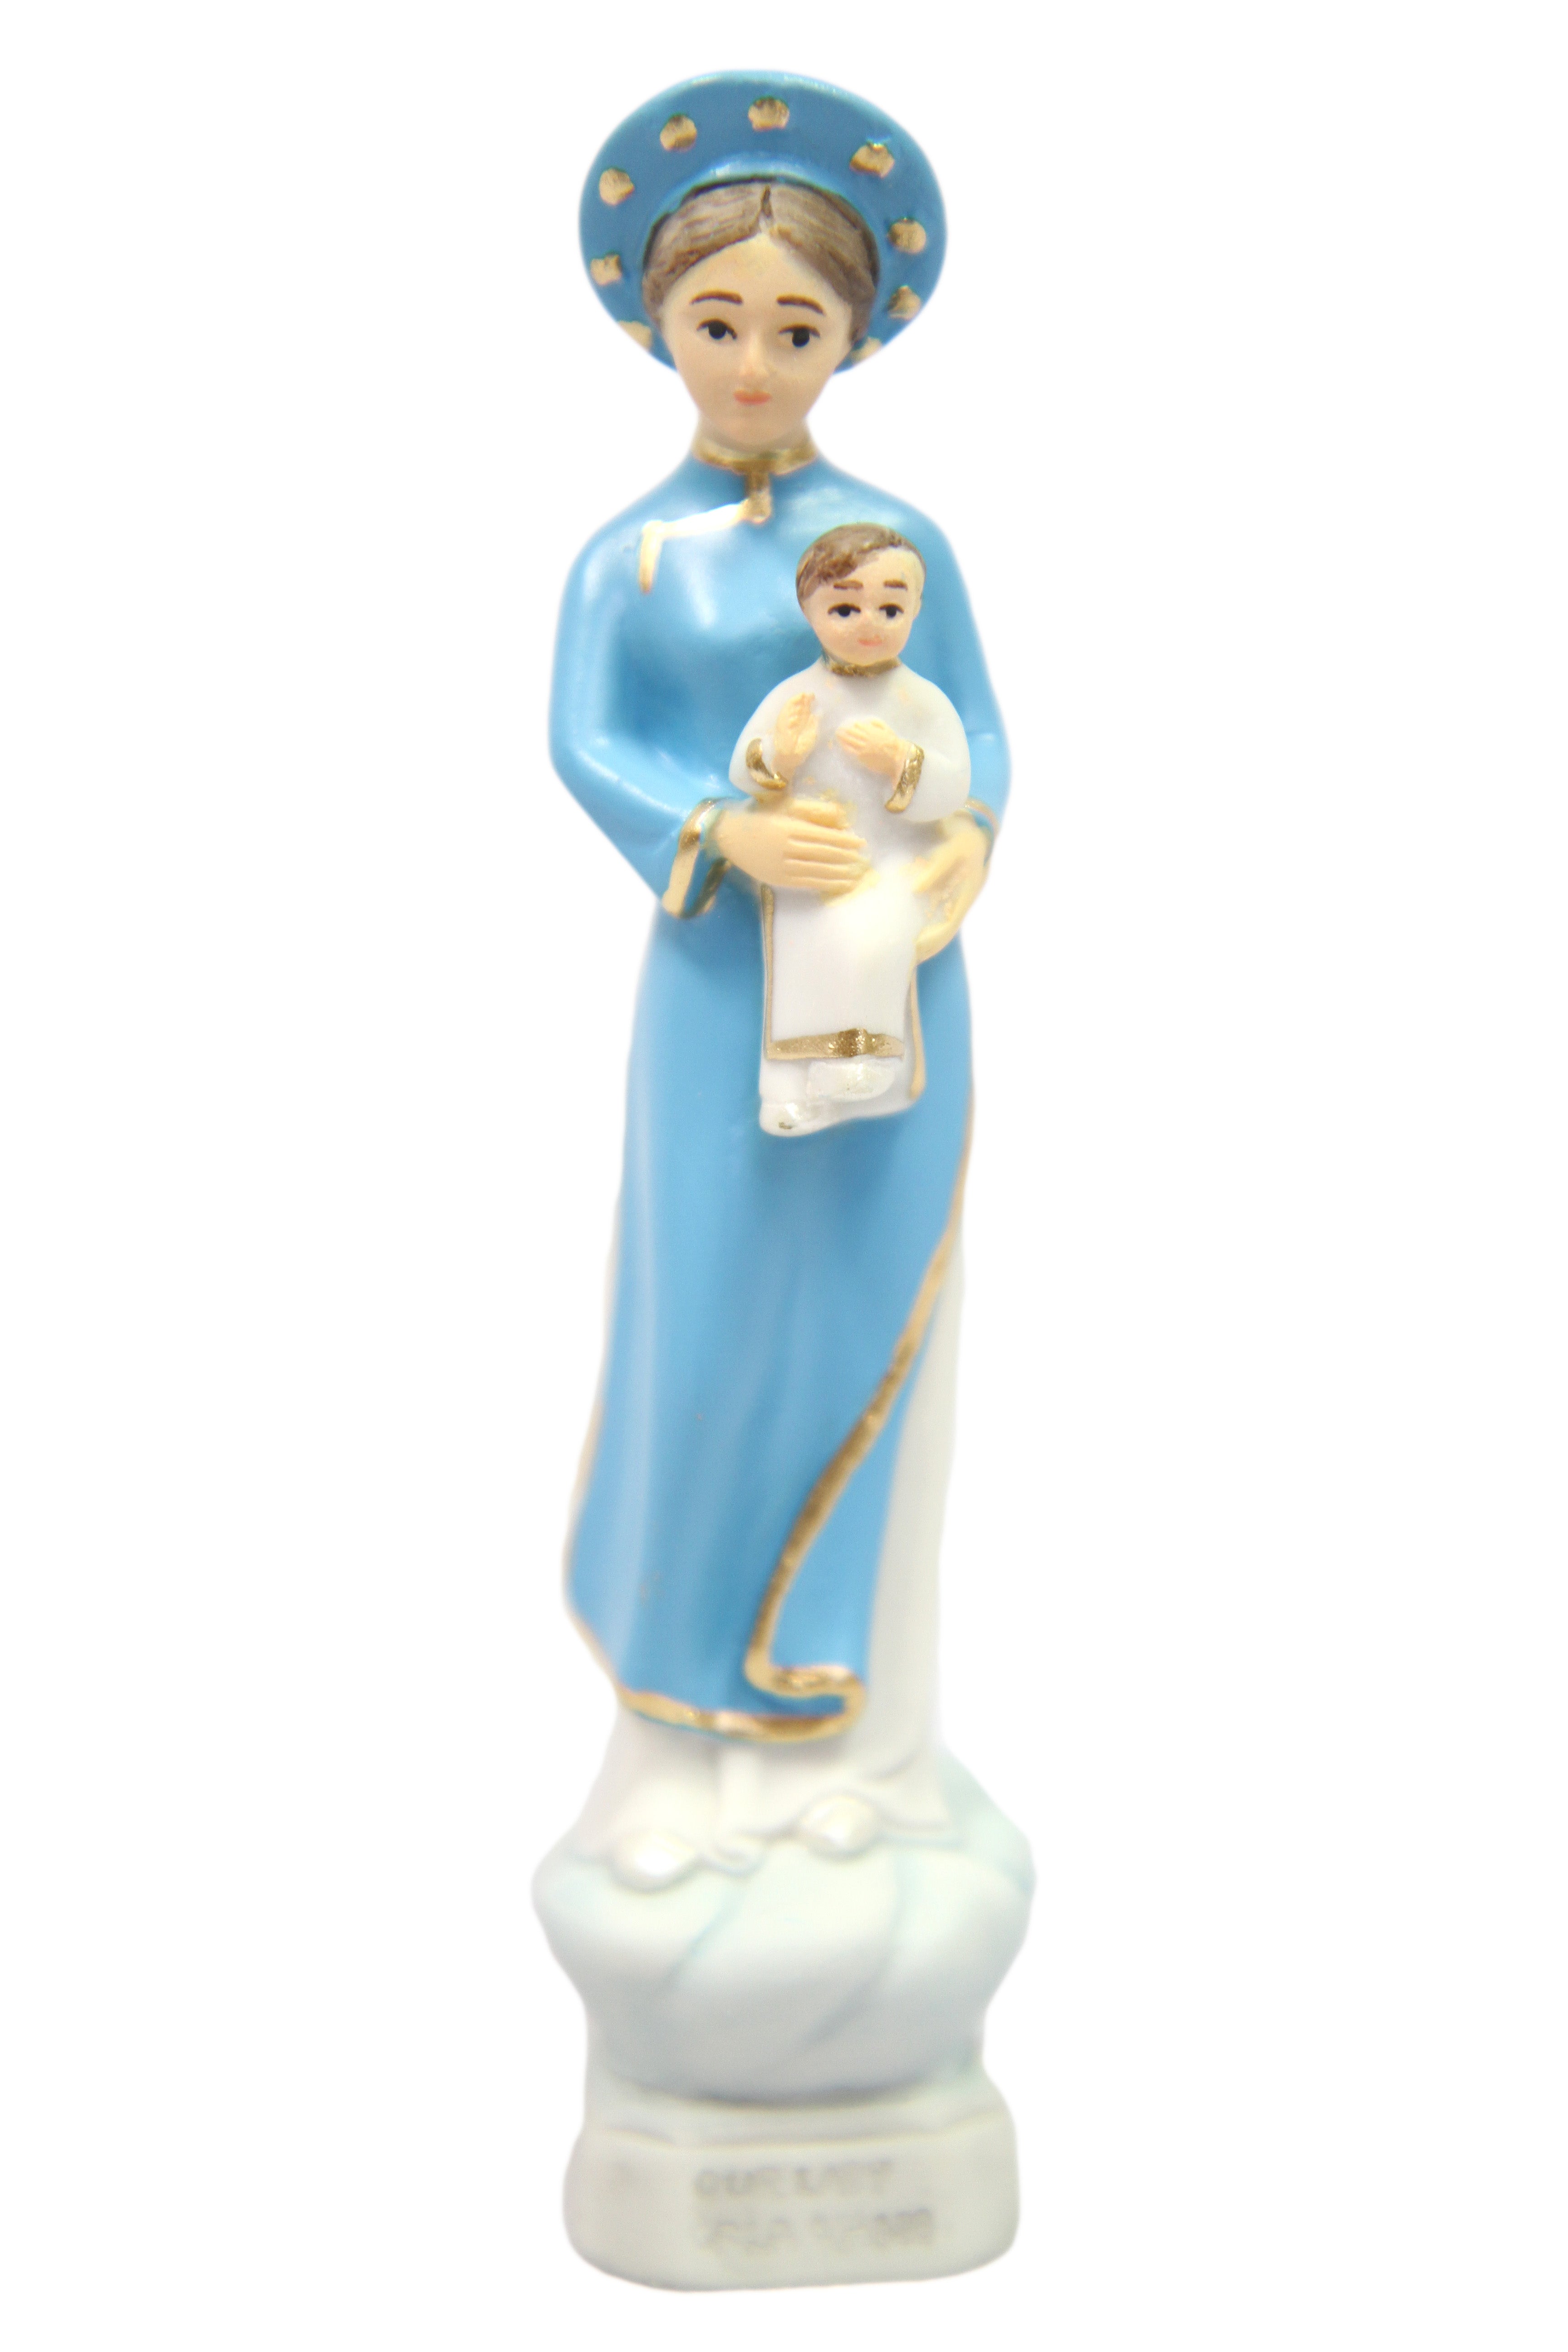 5 Inch Our Lady of La Vang Virgin Mary Blessed Mother Catholic Religious Statue Figurine Vittoria Collection Made in Italy